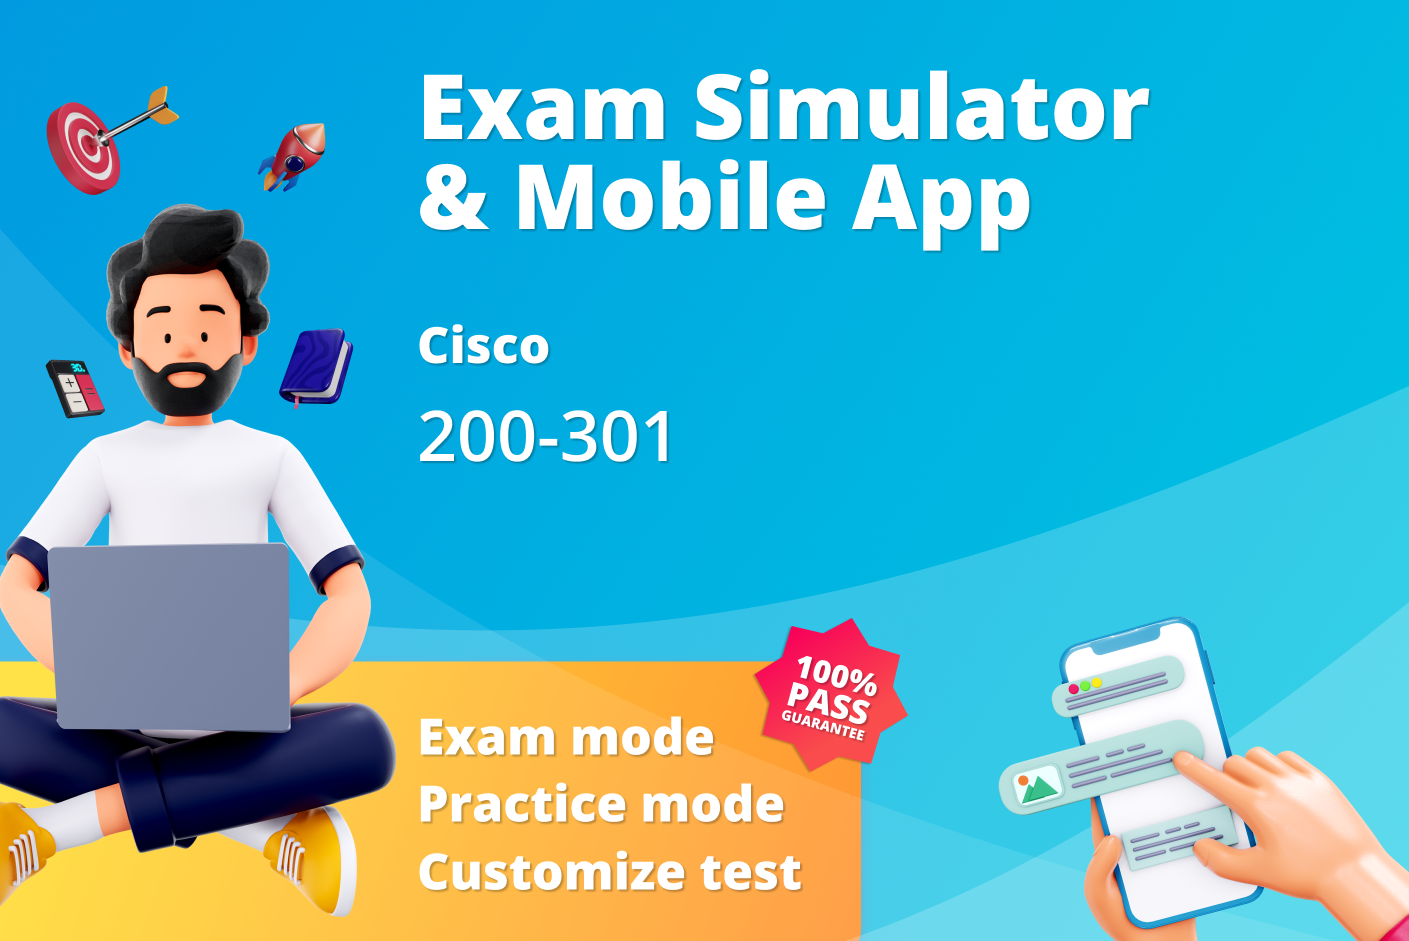 Cisco 200-301 Mock Exam: Test your skills in Australia with our comprehensive practice test